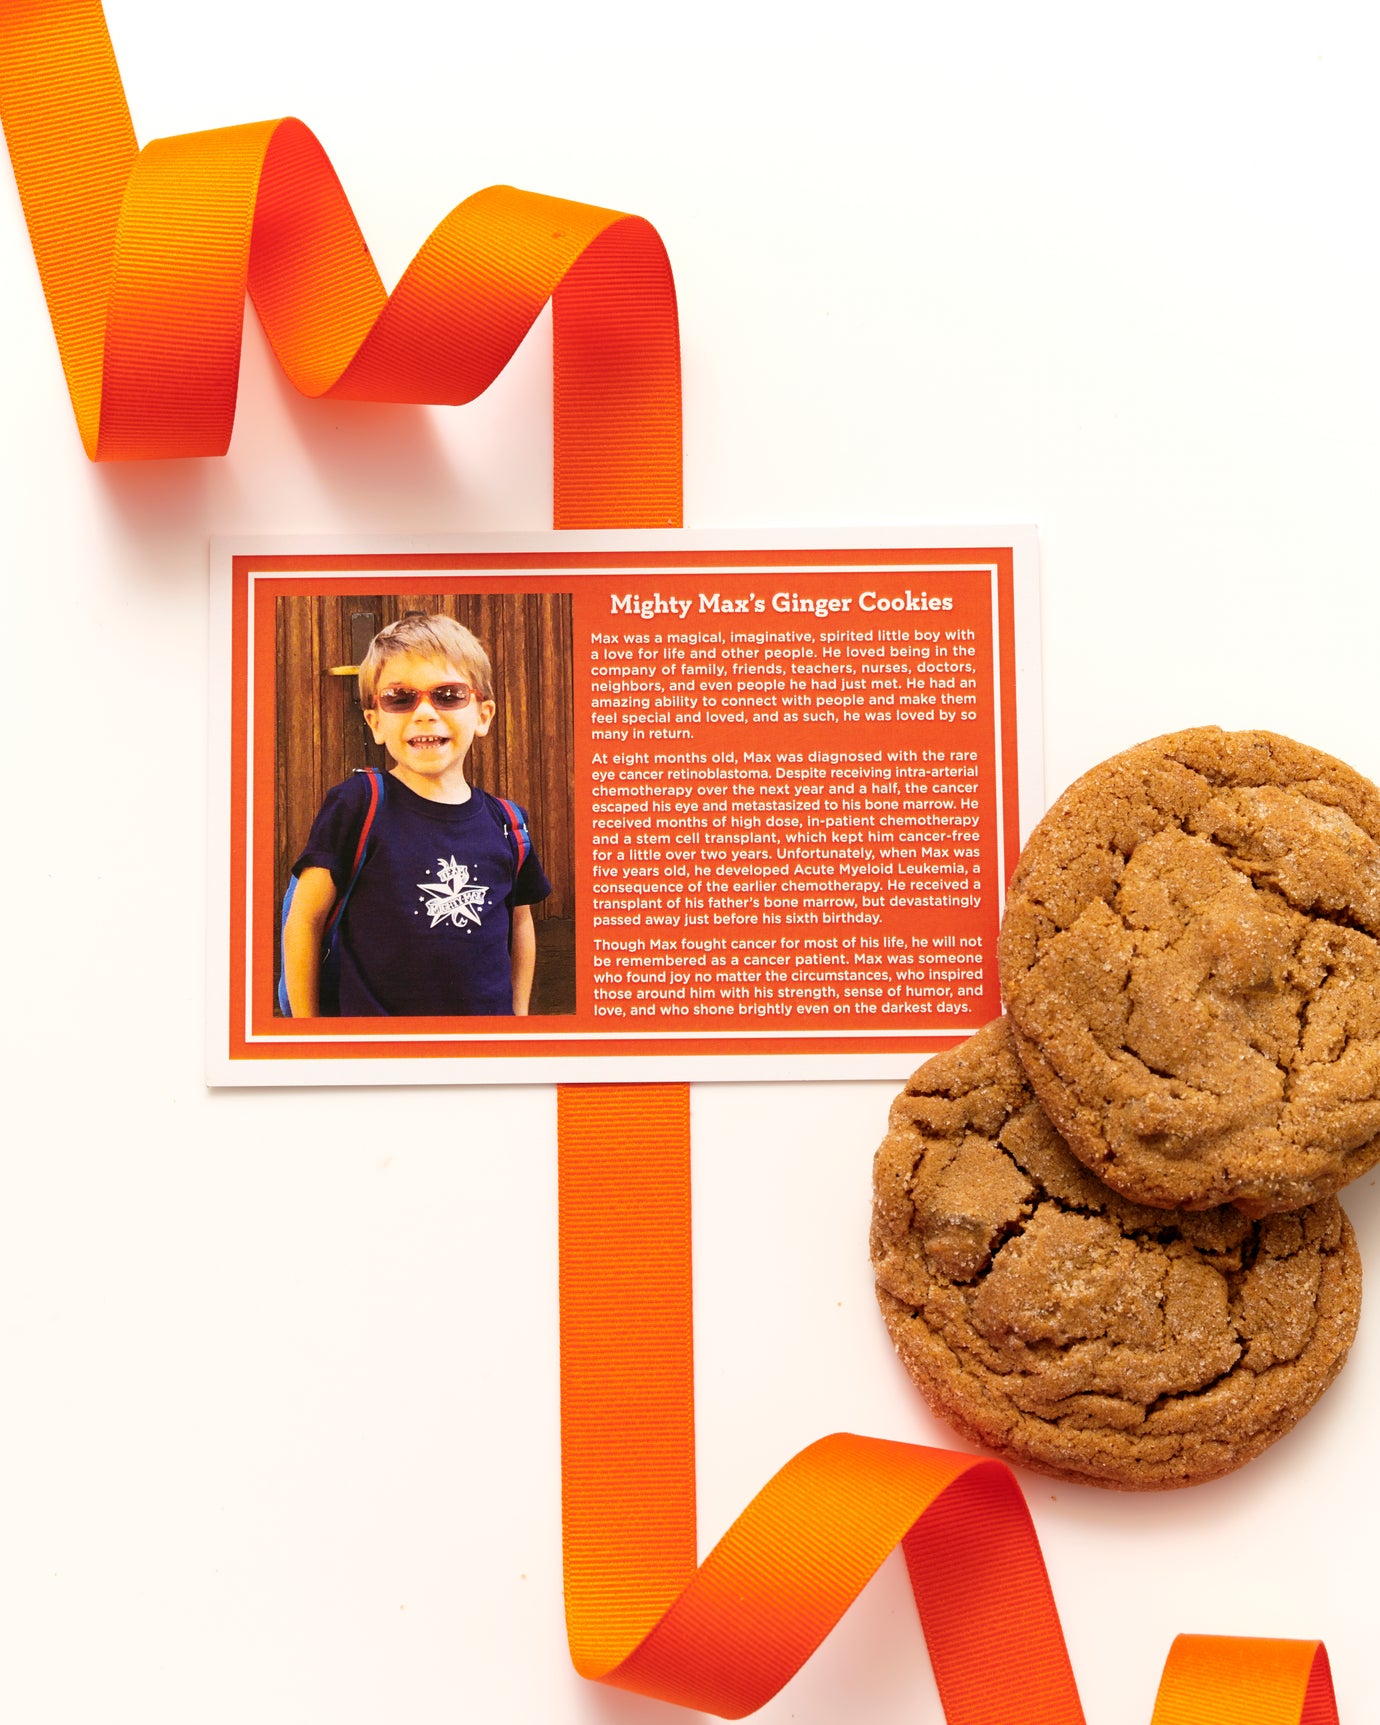 Mighty Max’s Ginger Cookies